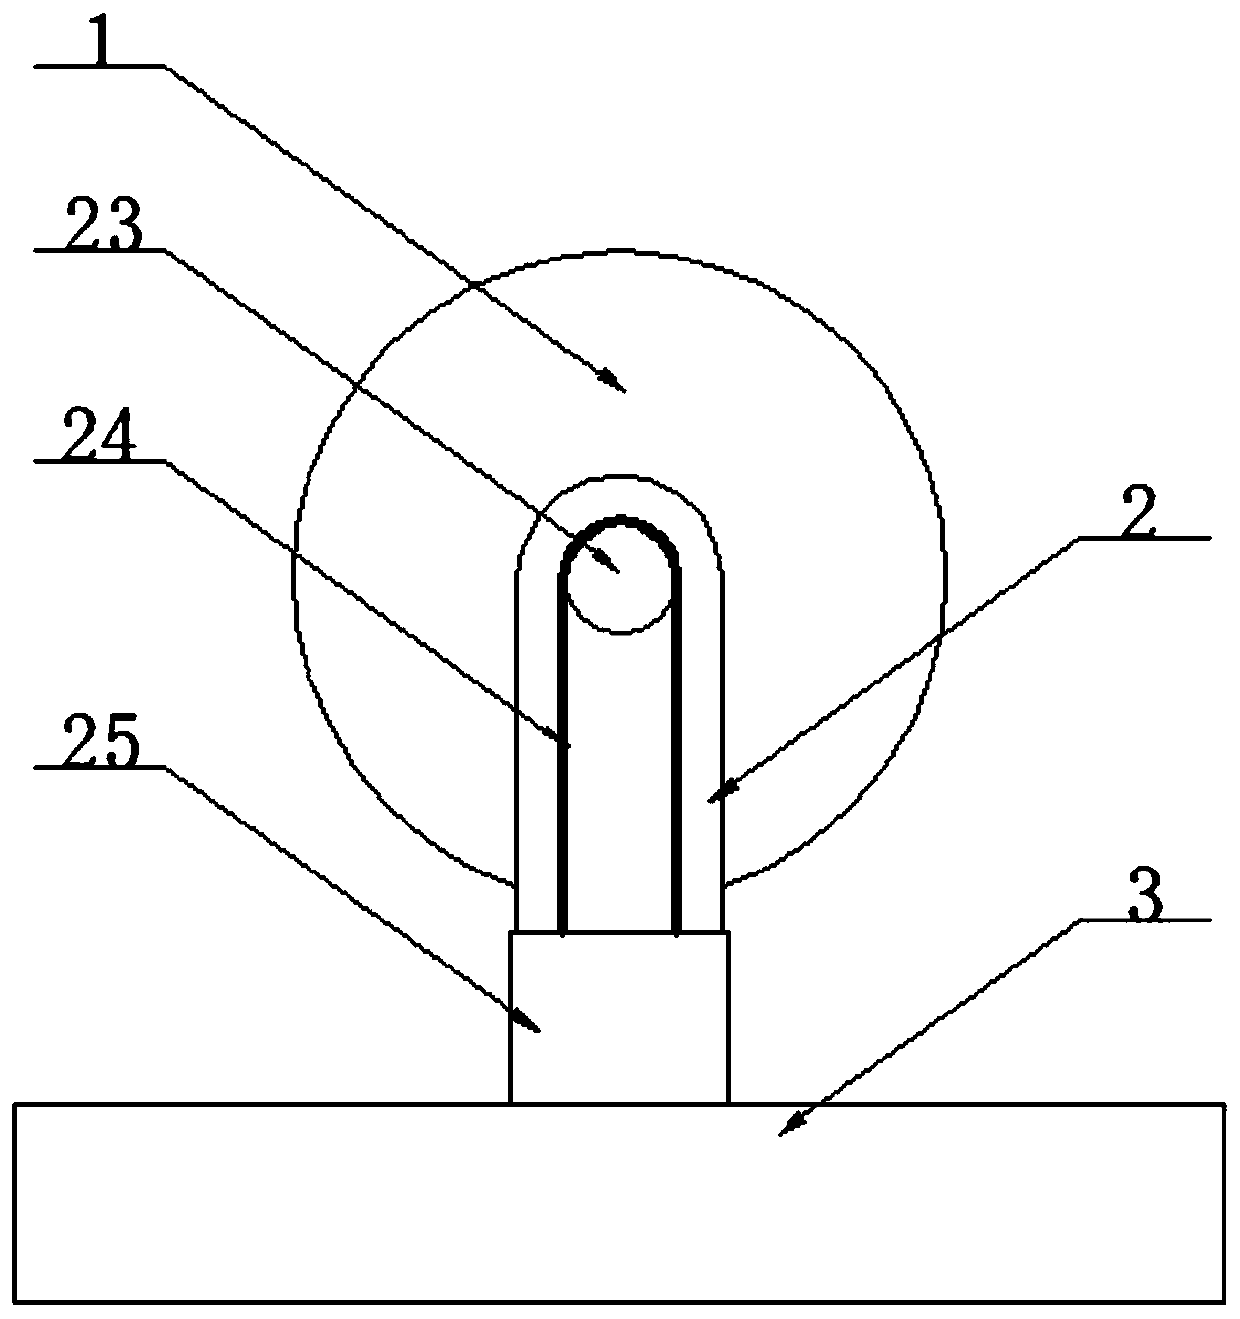 Cable shearing mechanism for power construction